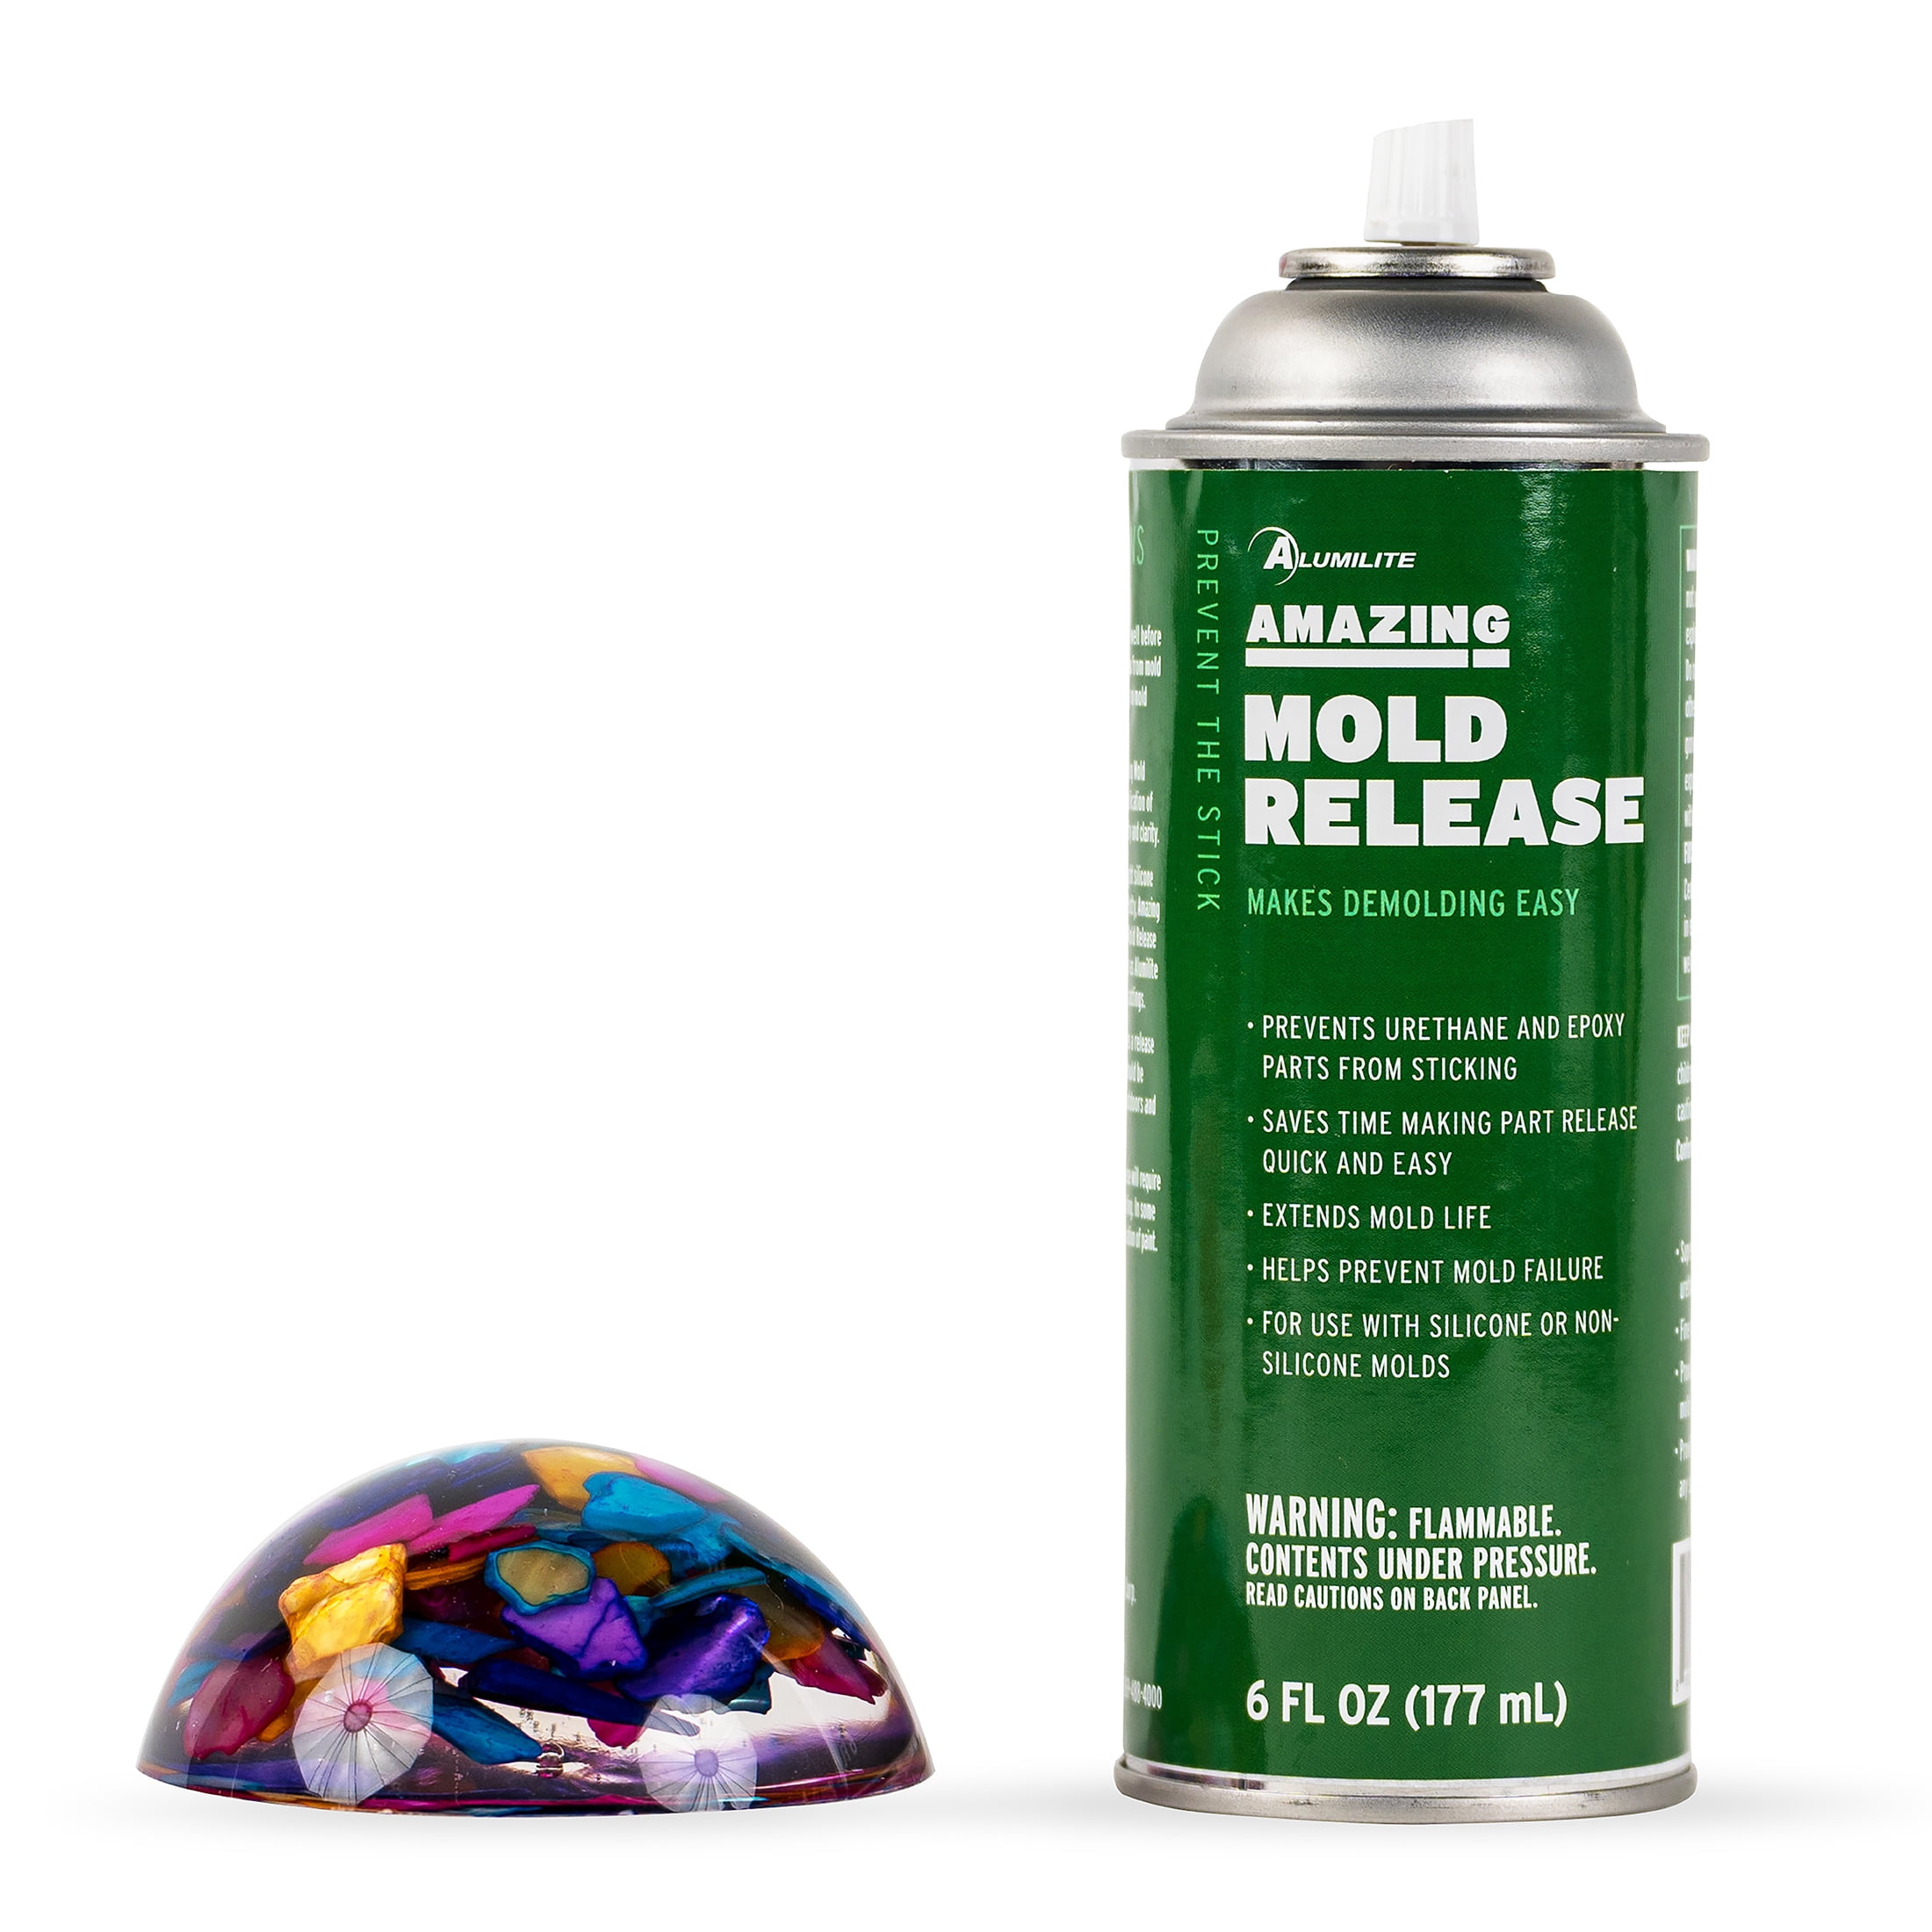 Liqui Moly Silicone Spray, Do you want to avoid unexpected  repair/replacement costs? With Liqui Moly silicone spray, you can prolong  the lifespan of your beloved auto parts. It